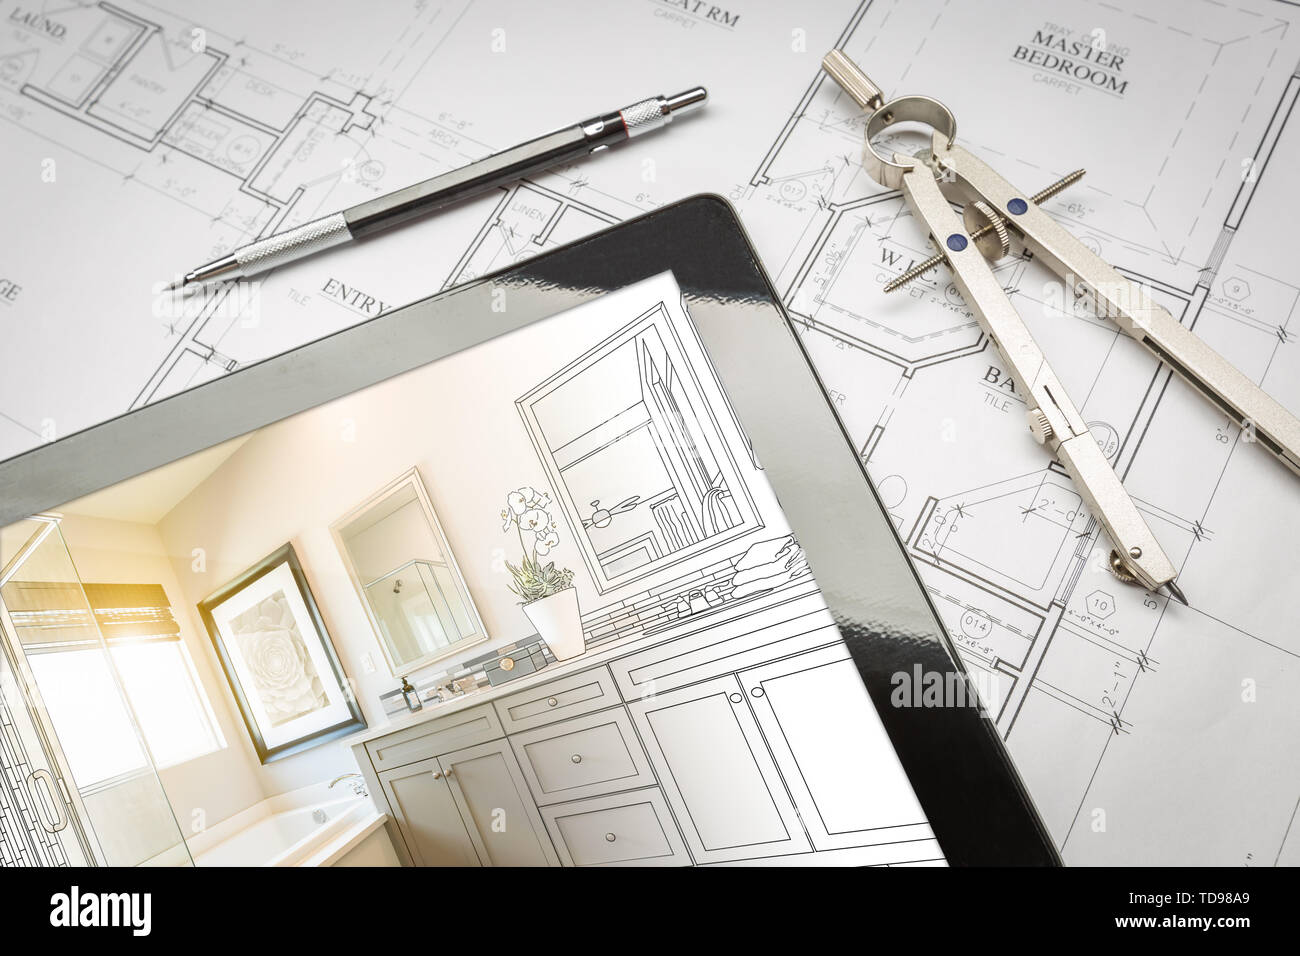 Computer Tablet with Master Bathroom Design Over House Plans, Pencil and Compass. Stock Photo